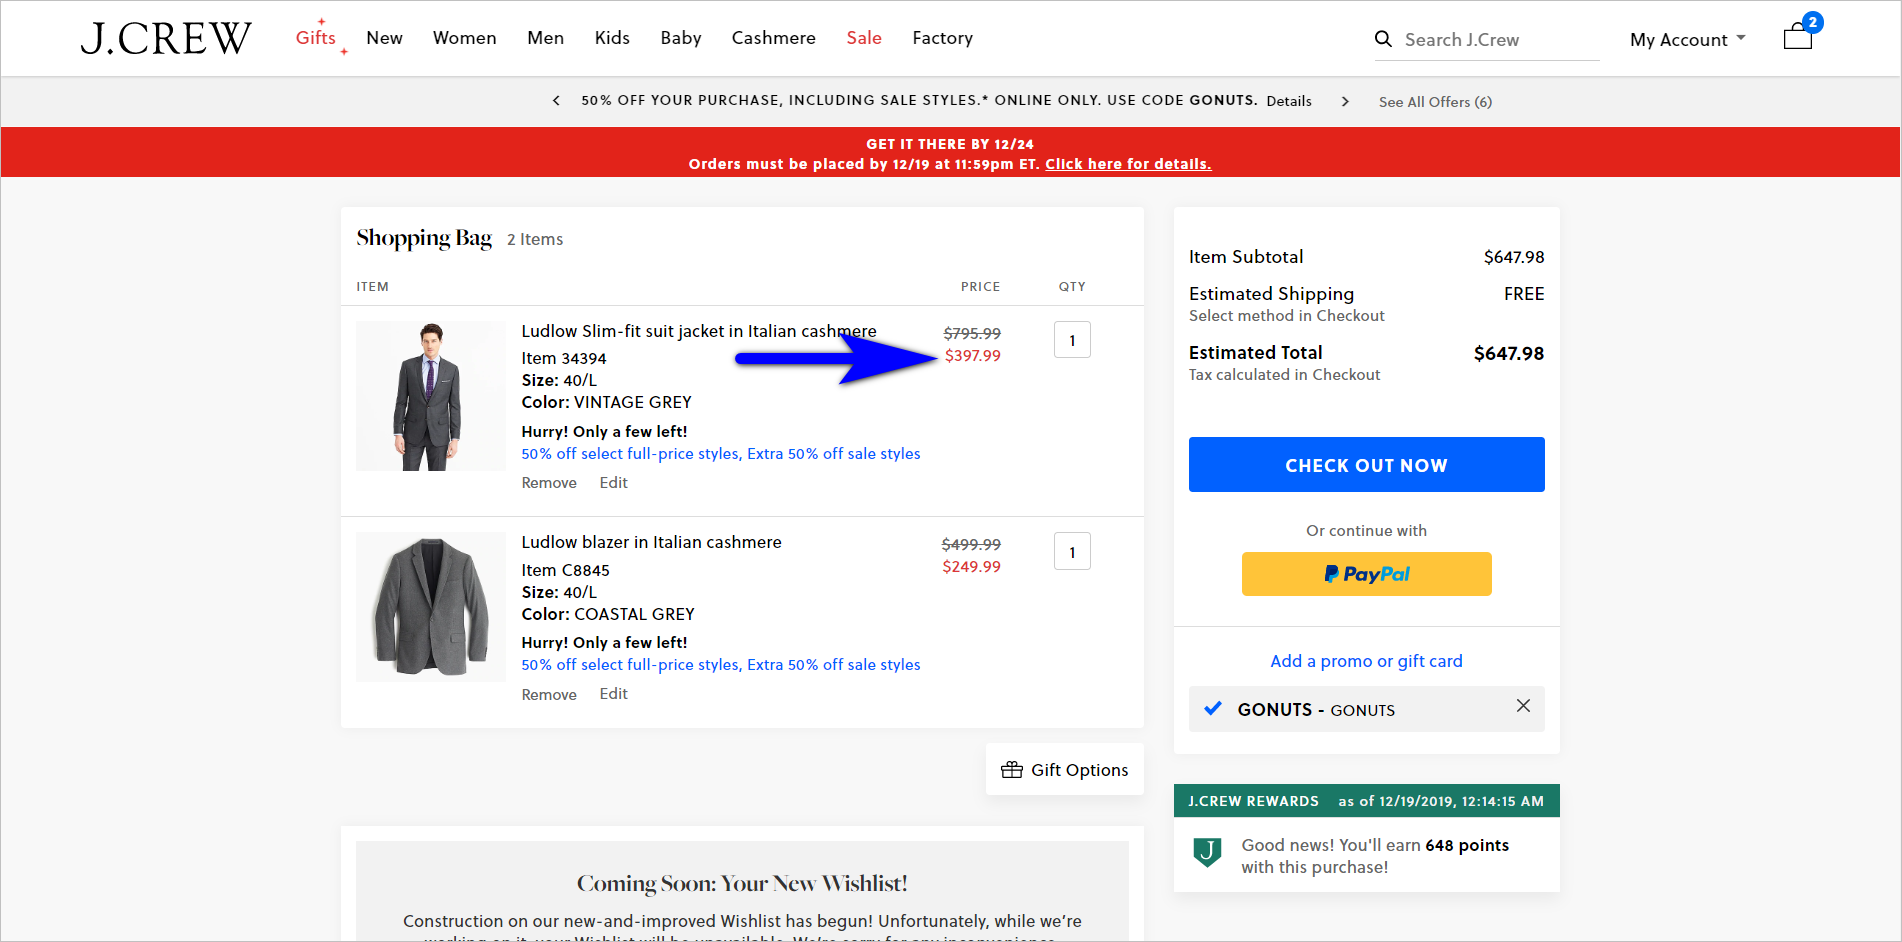 discount pricing strategies - failure to convey the effect of the discount example - jcrew.com shopping cart with a strikethrough on the original prices and the sale prices in red. the total amount saved is not included in the cta block, however